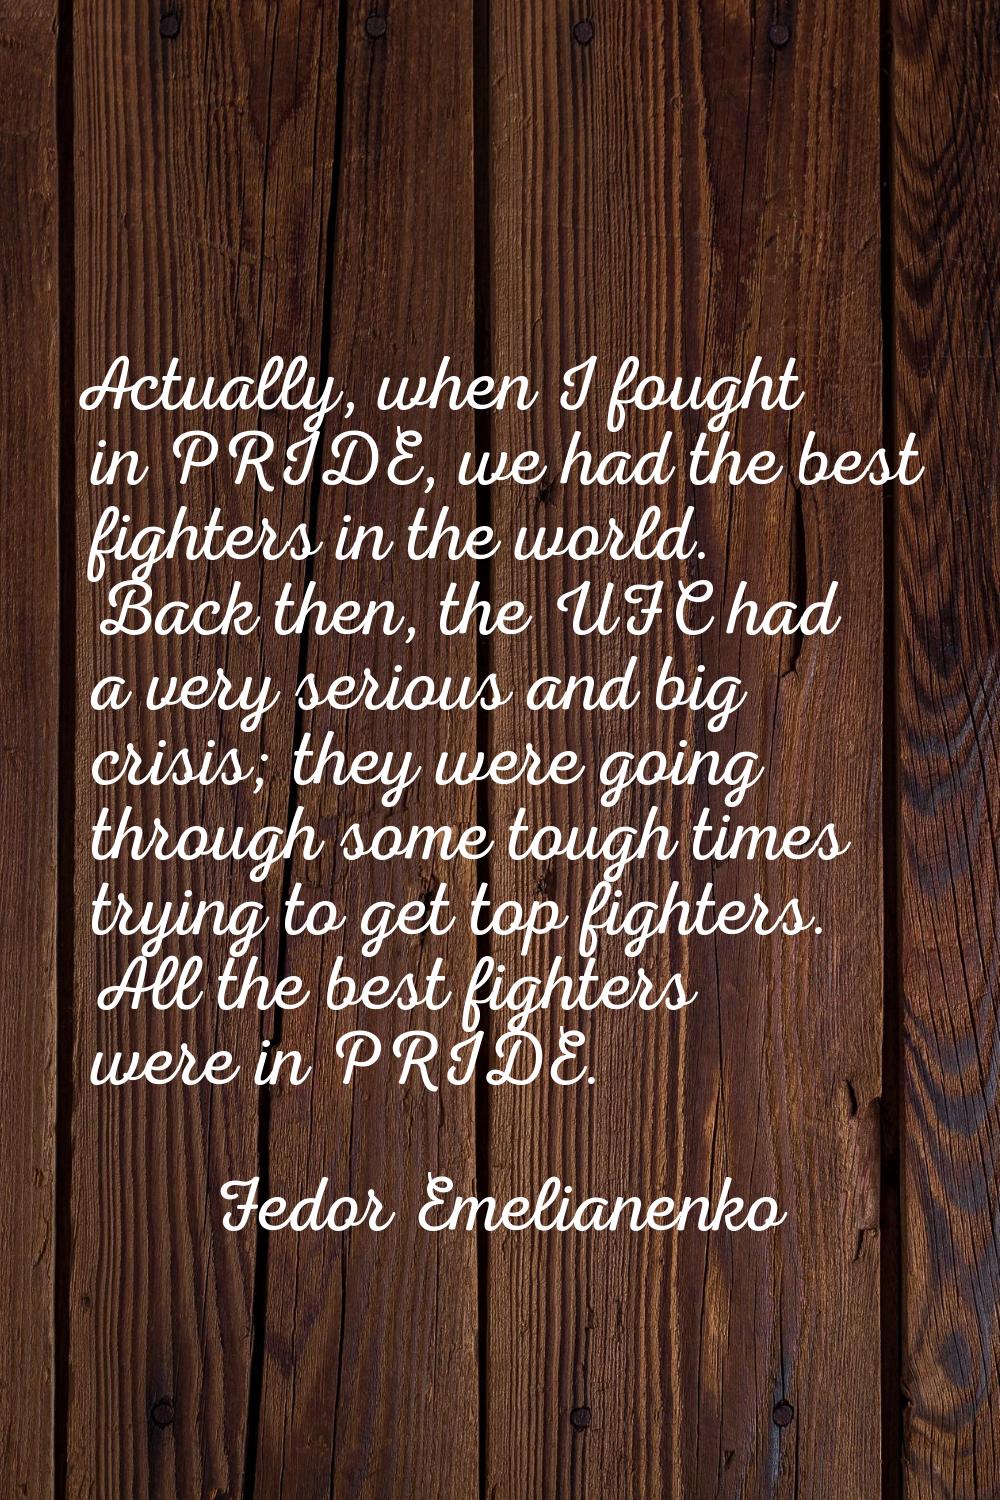 Actually, when I fought in PRIDE, we had the best fighters in the world. Back then, the UFC had a v